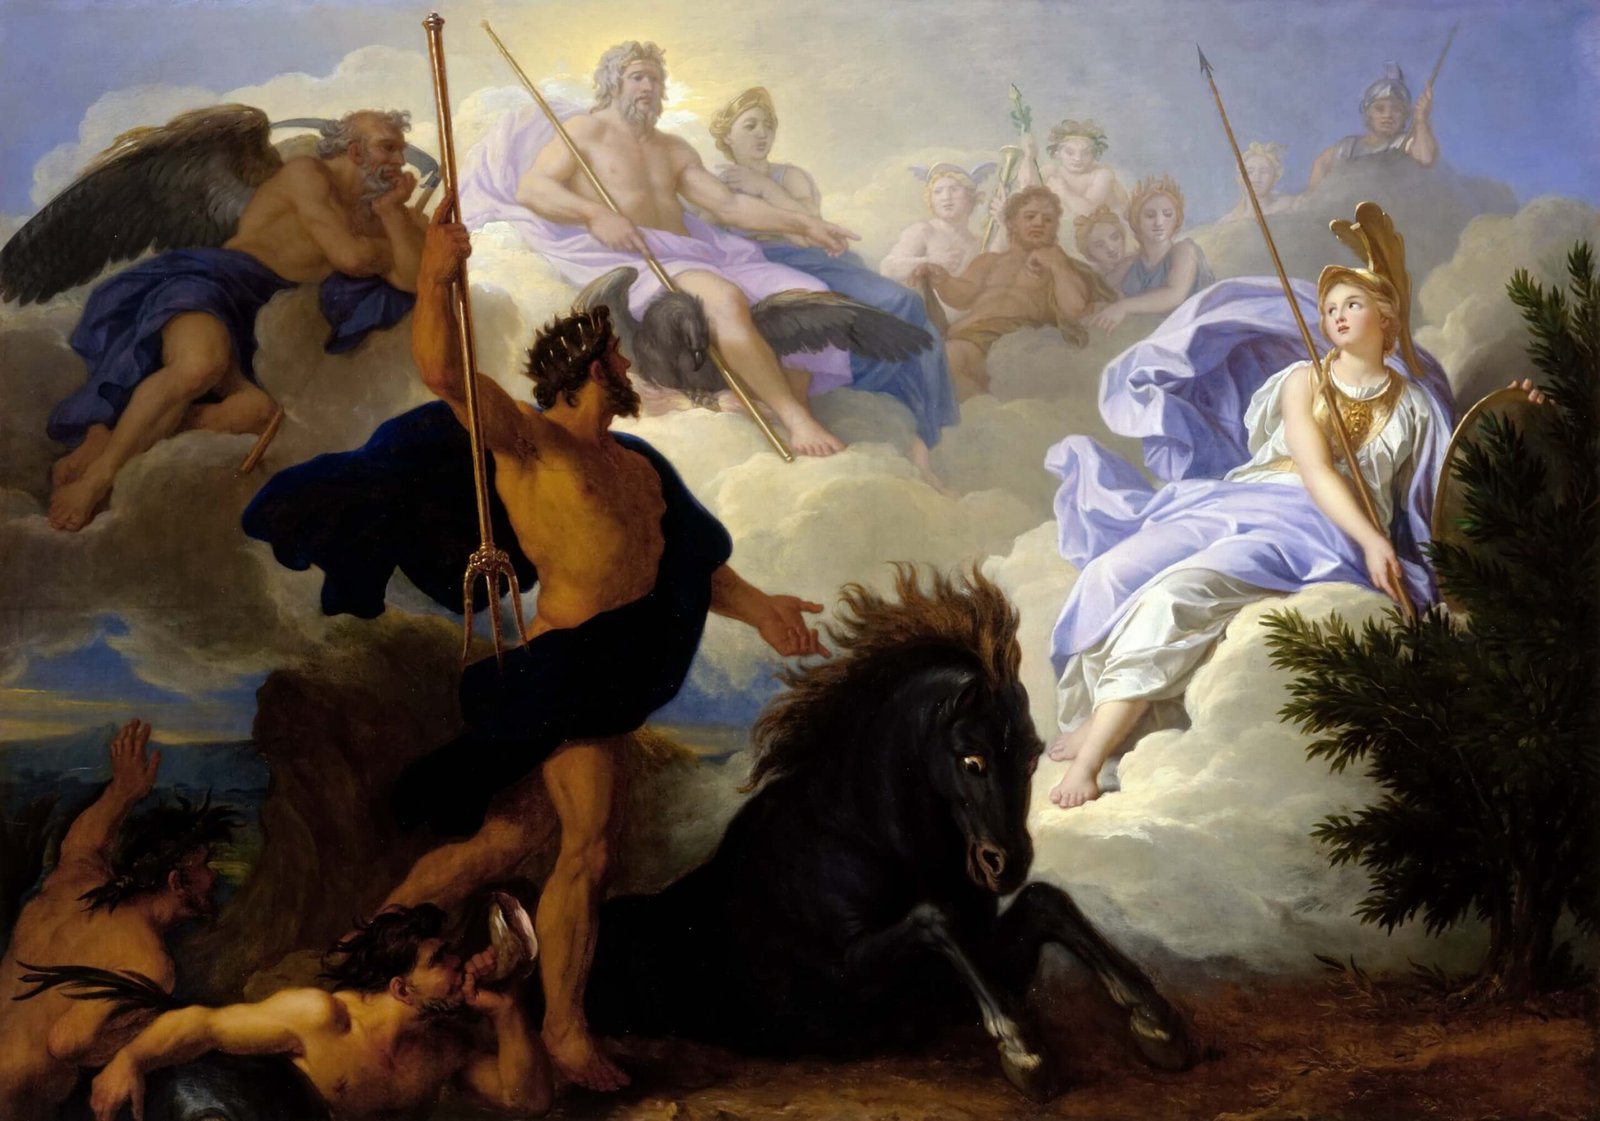 This painting represents Poseidon and Athena, surrounded by the gods of Olympus, that are sitting on the clouds. They have a dispute.